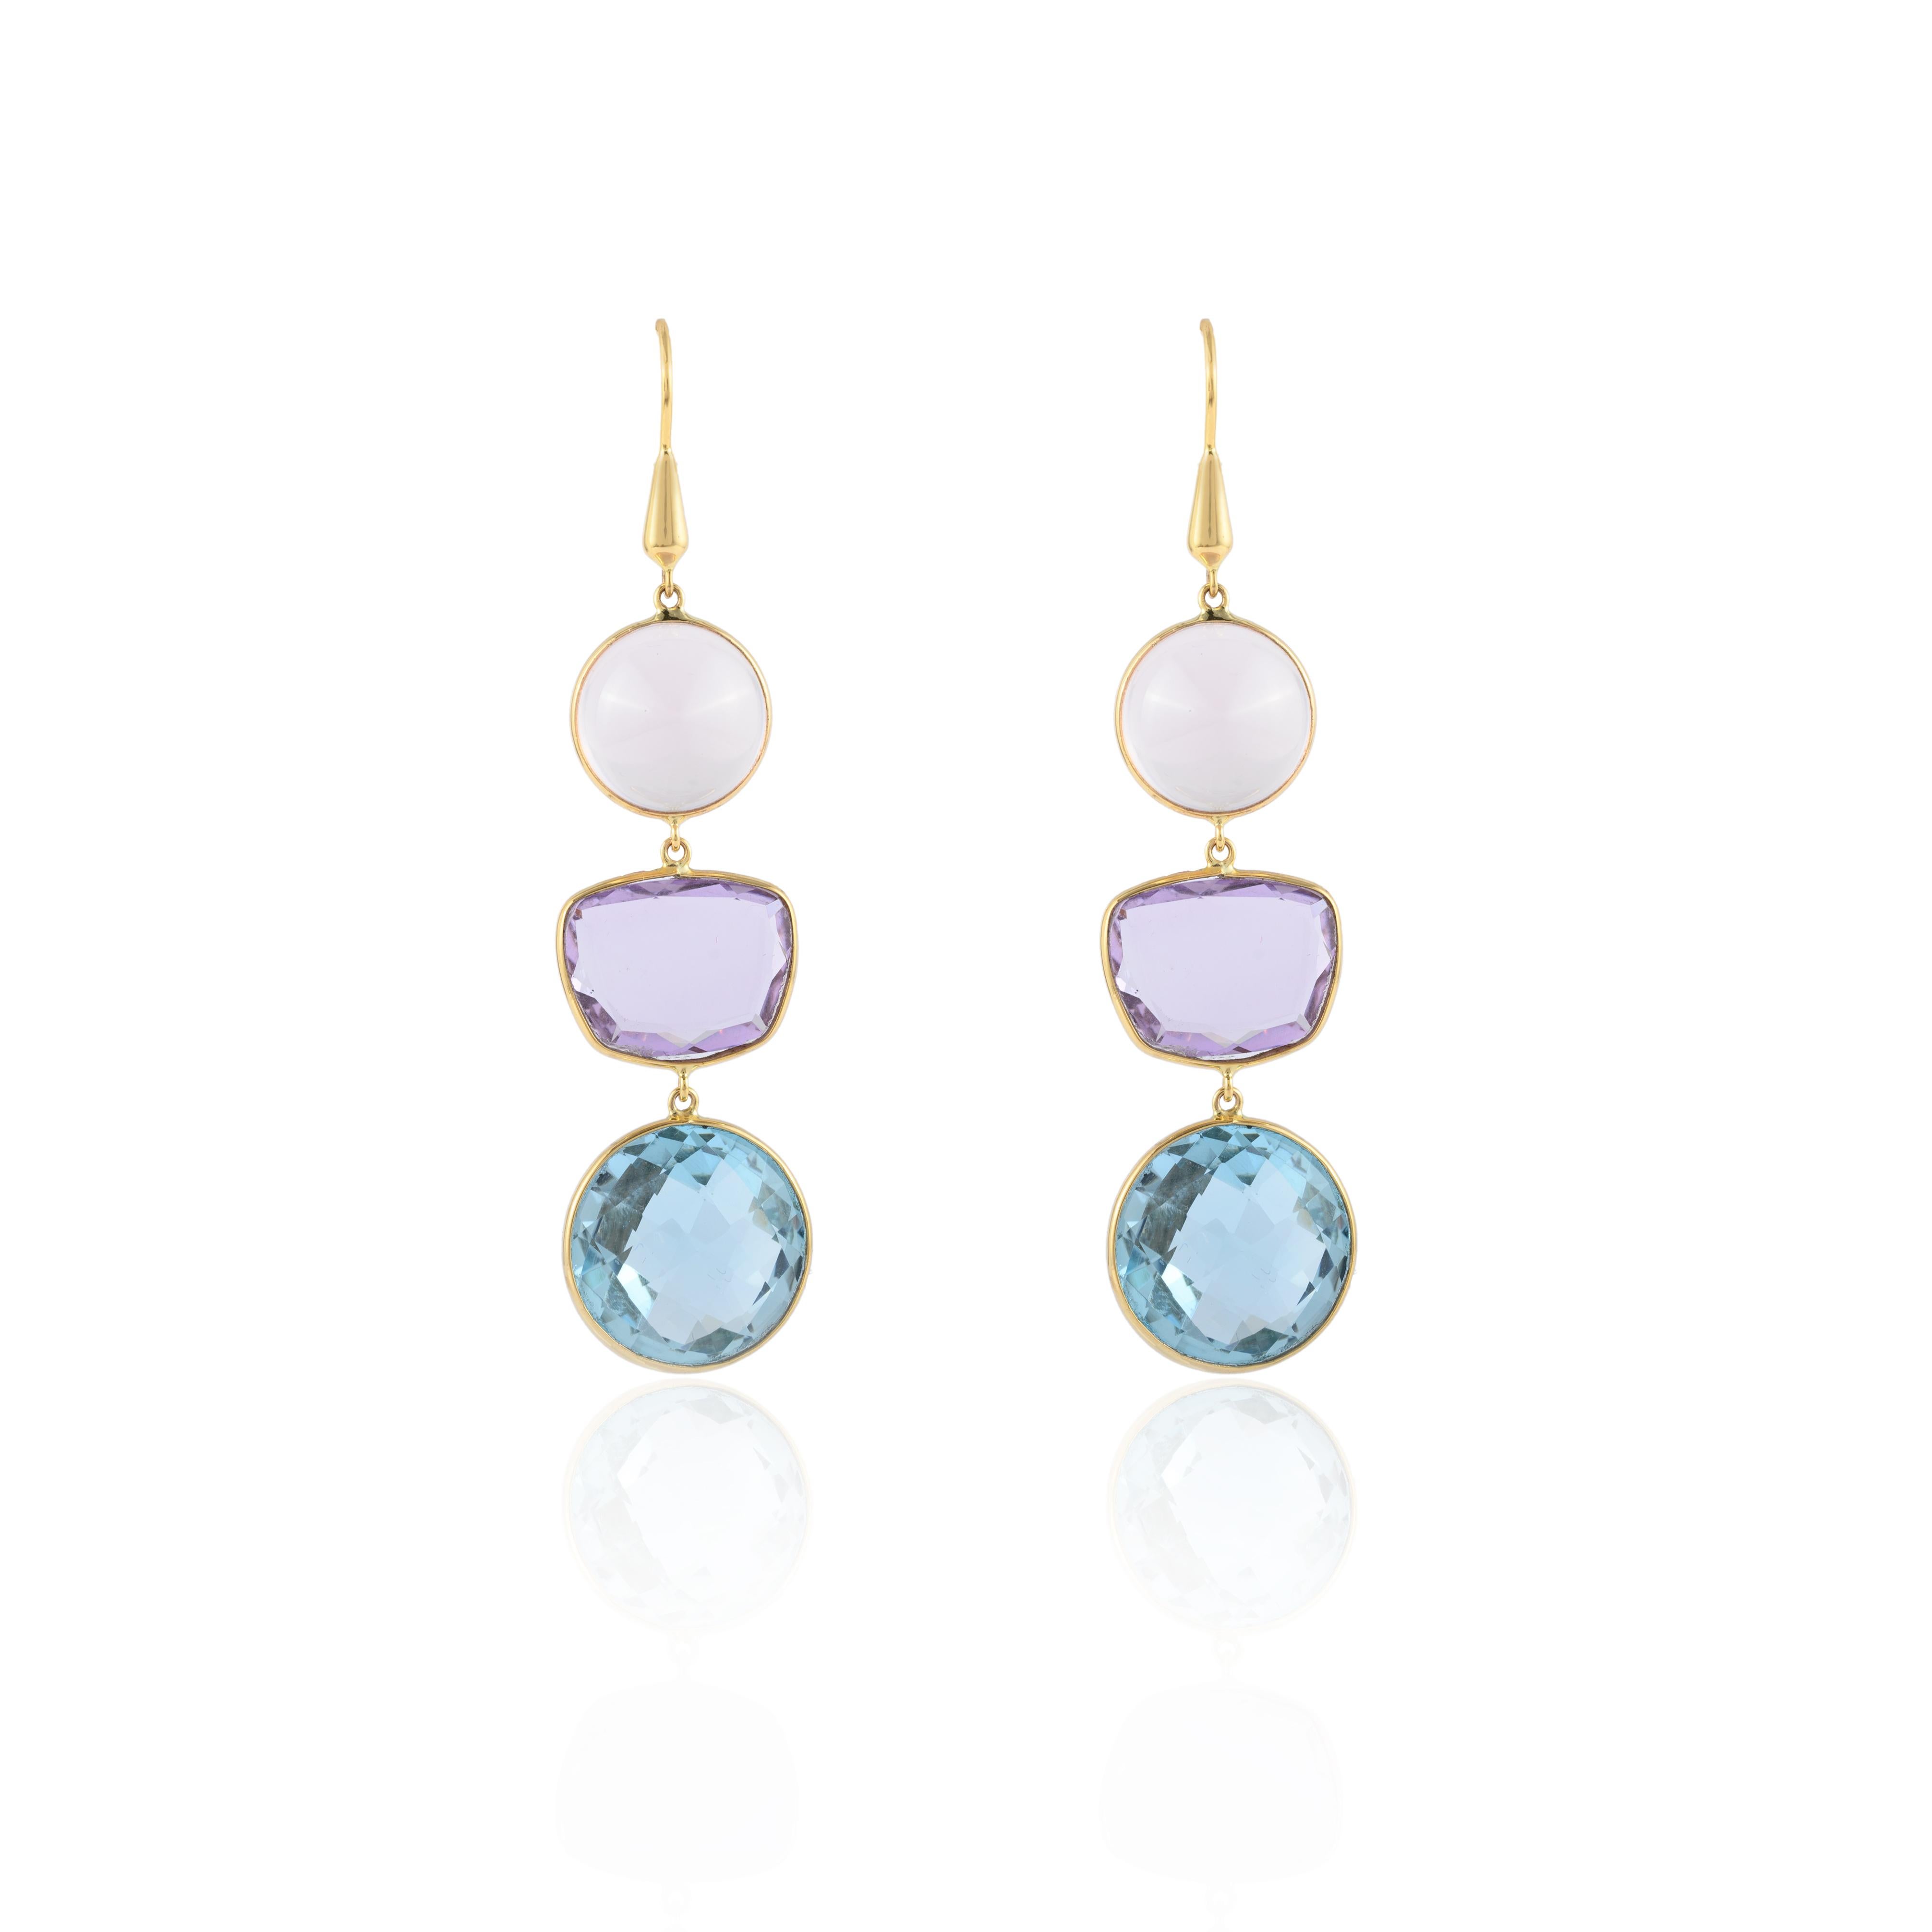 Handmade Multi Stone Earrings in 14K gold to make a statement with your look. These earrings create a sparkling, luxurious look featuring uneven cut semi precious gemstones.
Designed with different cut stones hanged vertically one after other